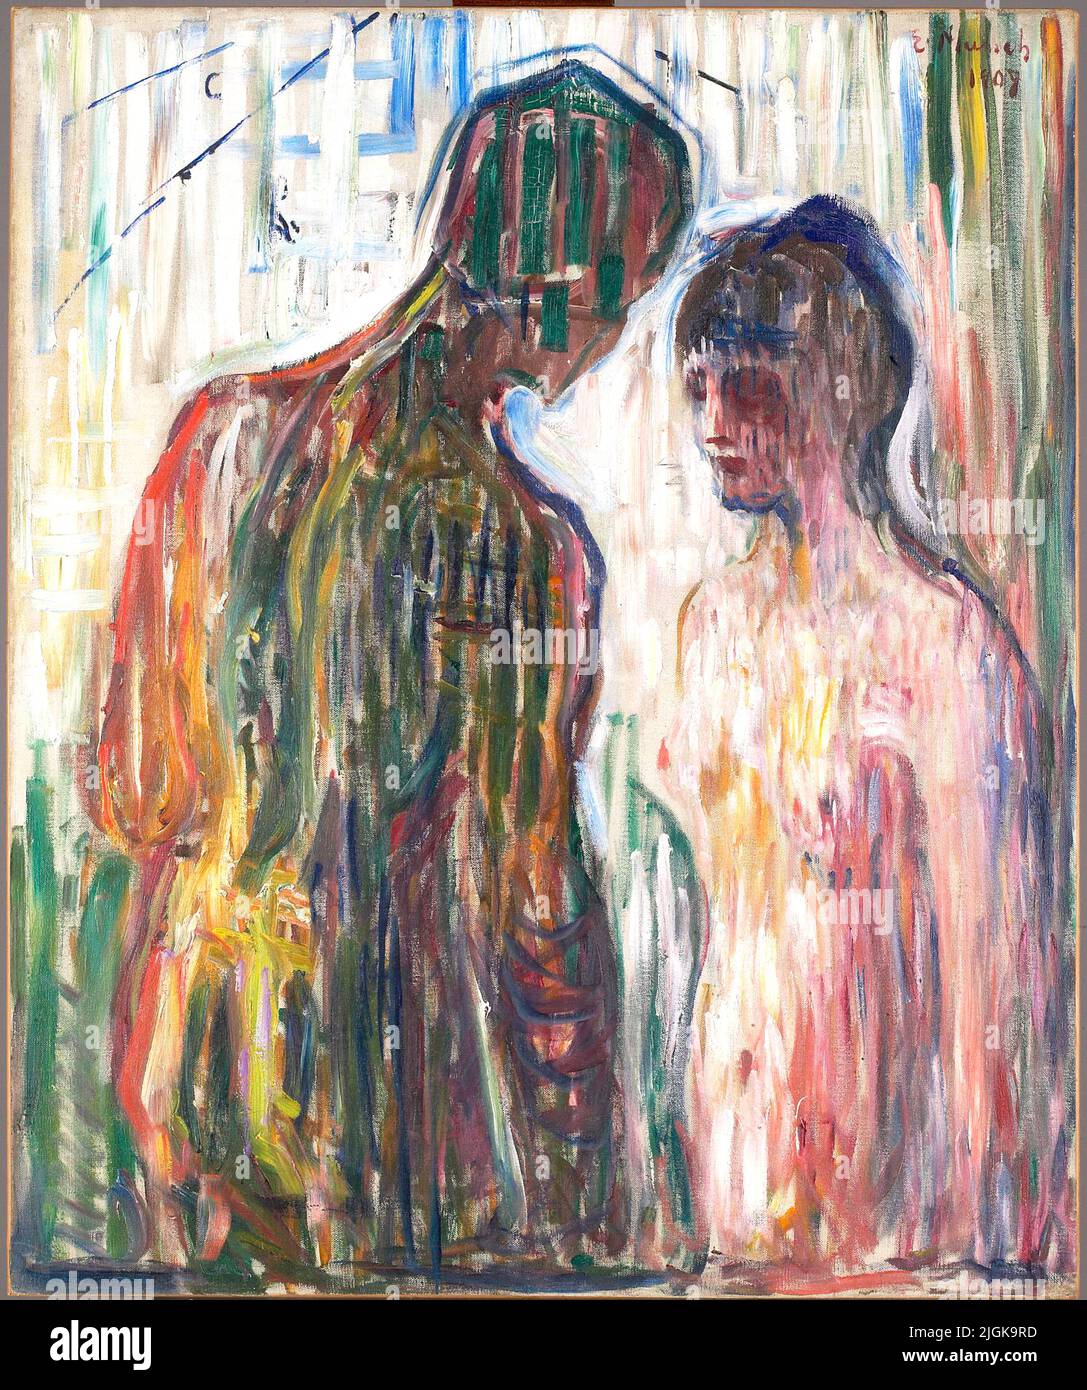 Edvard Munch - Cupid and Psyche - 1907 Stock Photo